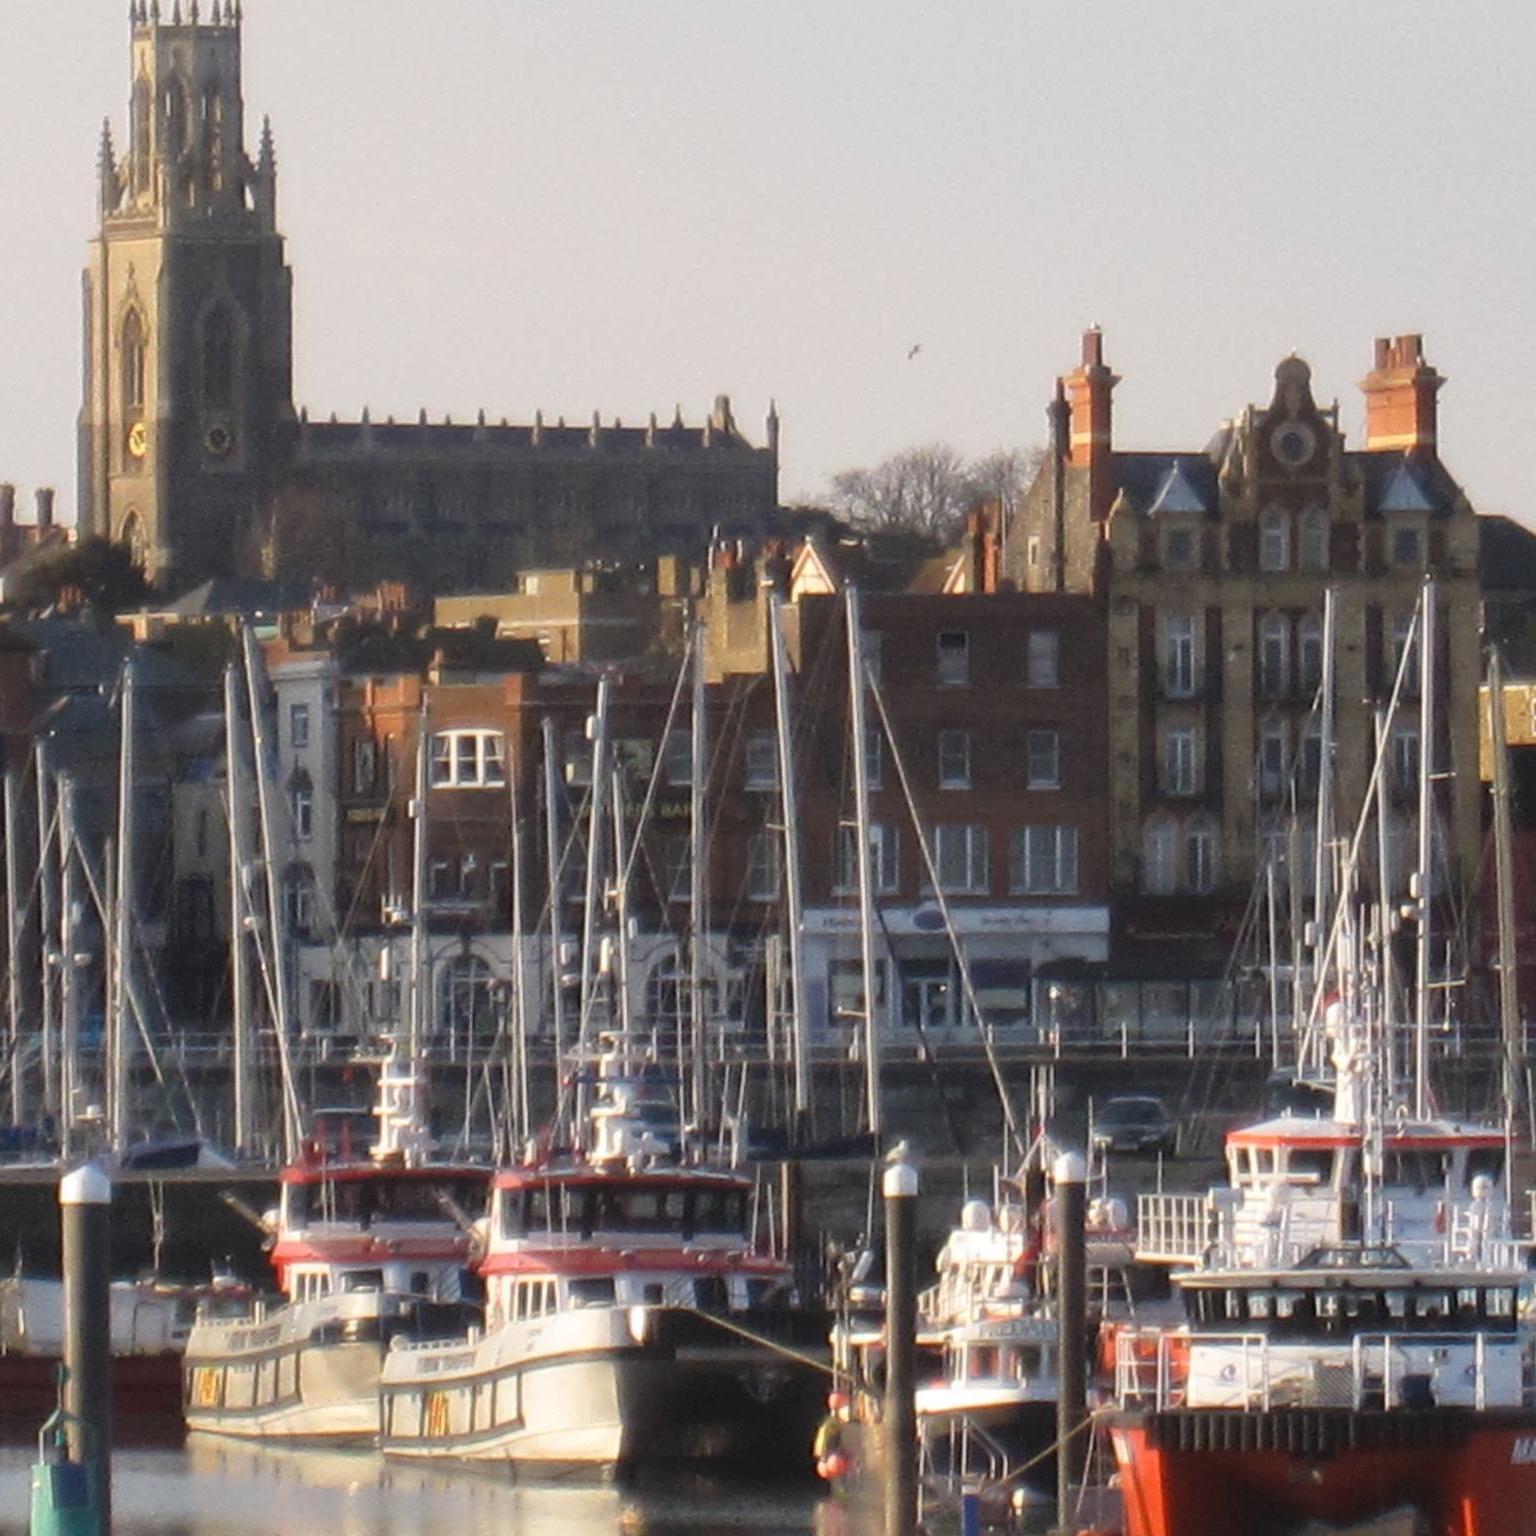 Ramsgate's Neighbourhood Plan will set the vision for the town over the next twenty years. What's your vision for Ramsgate?